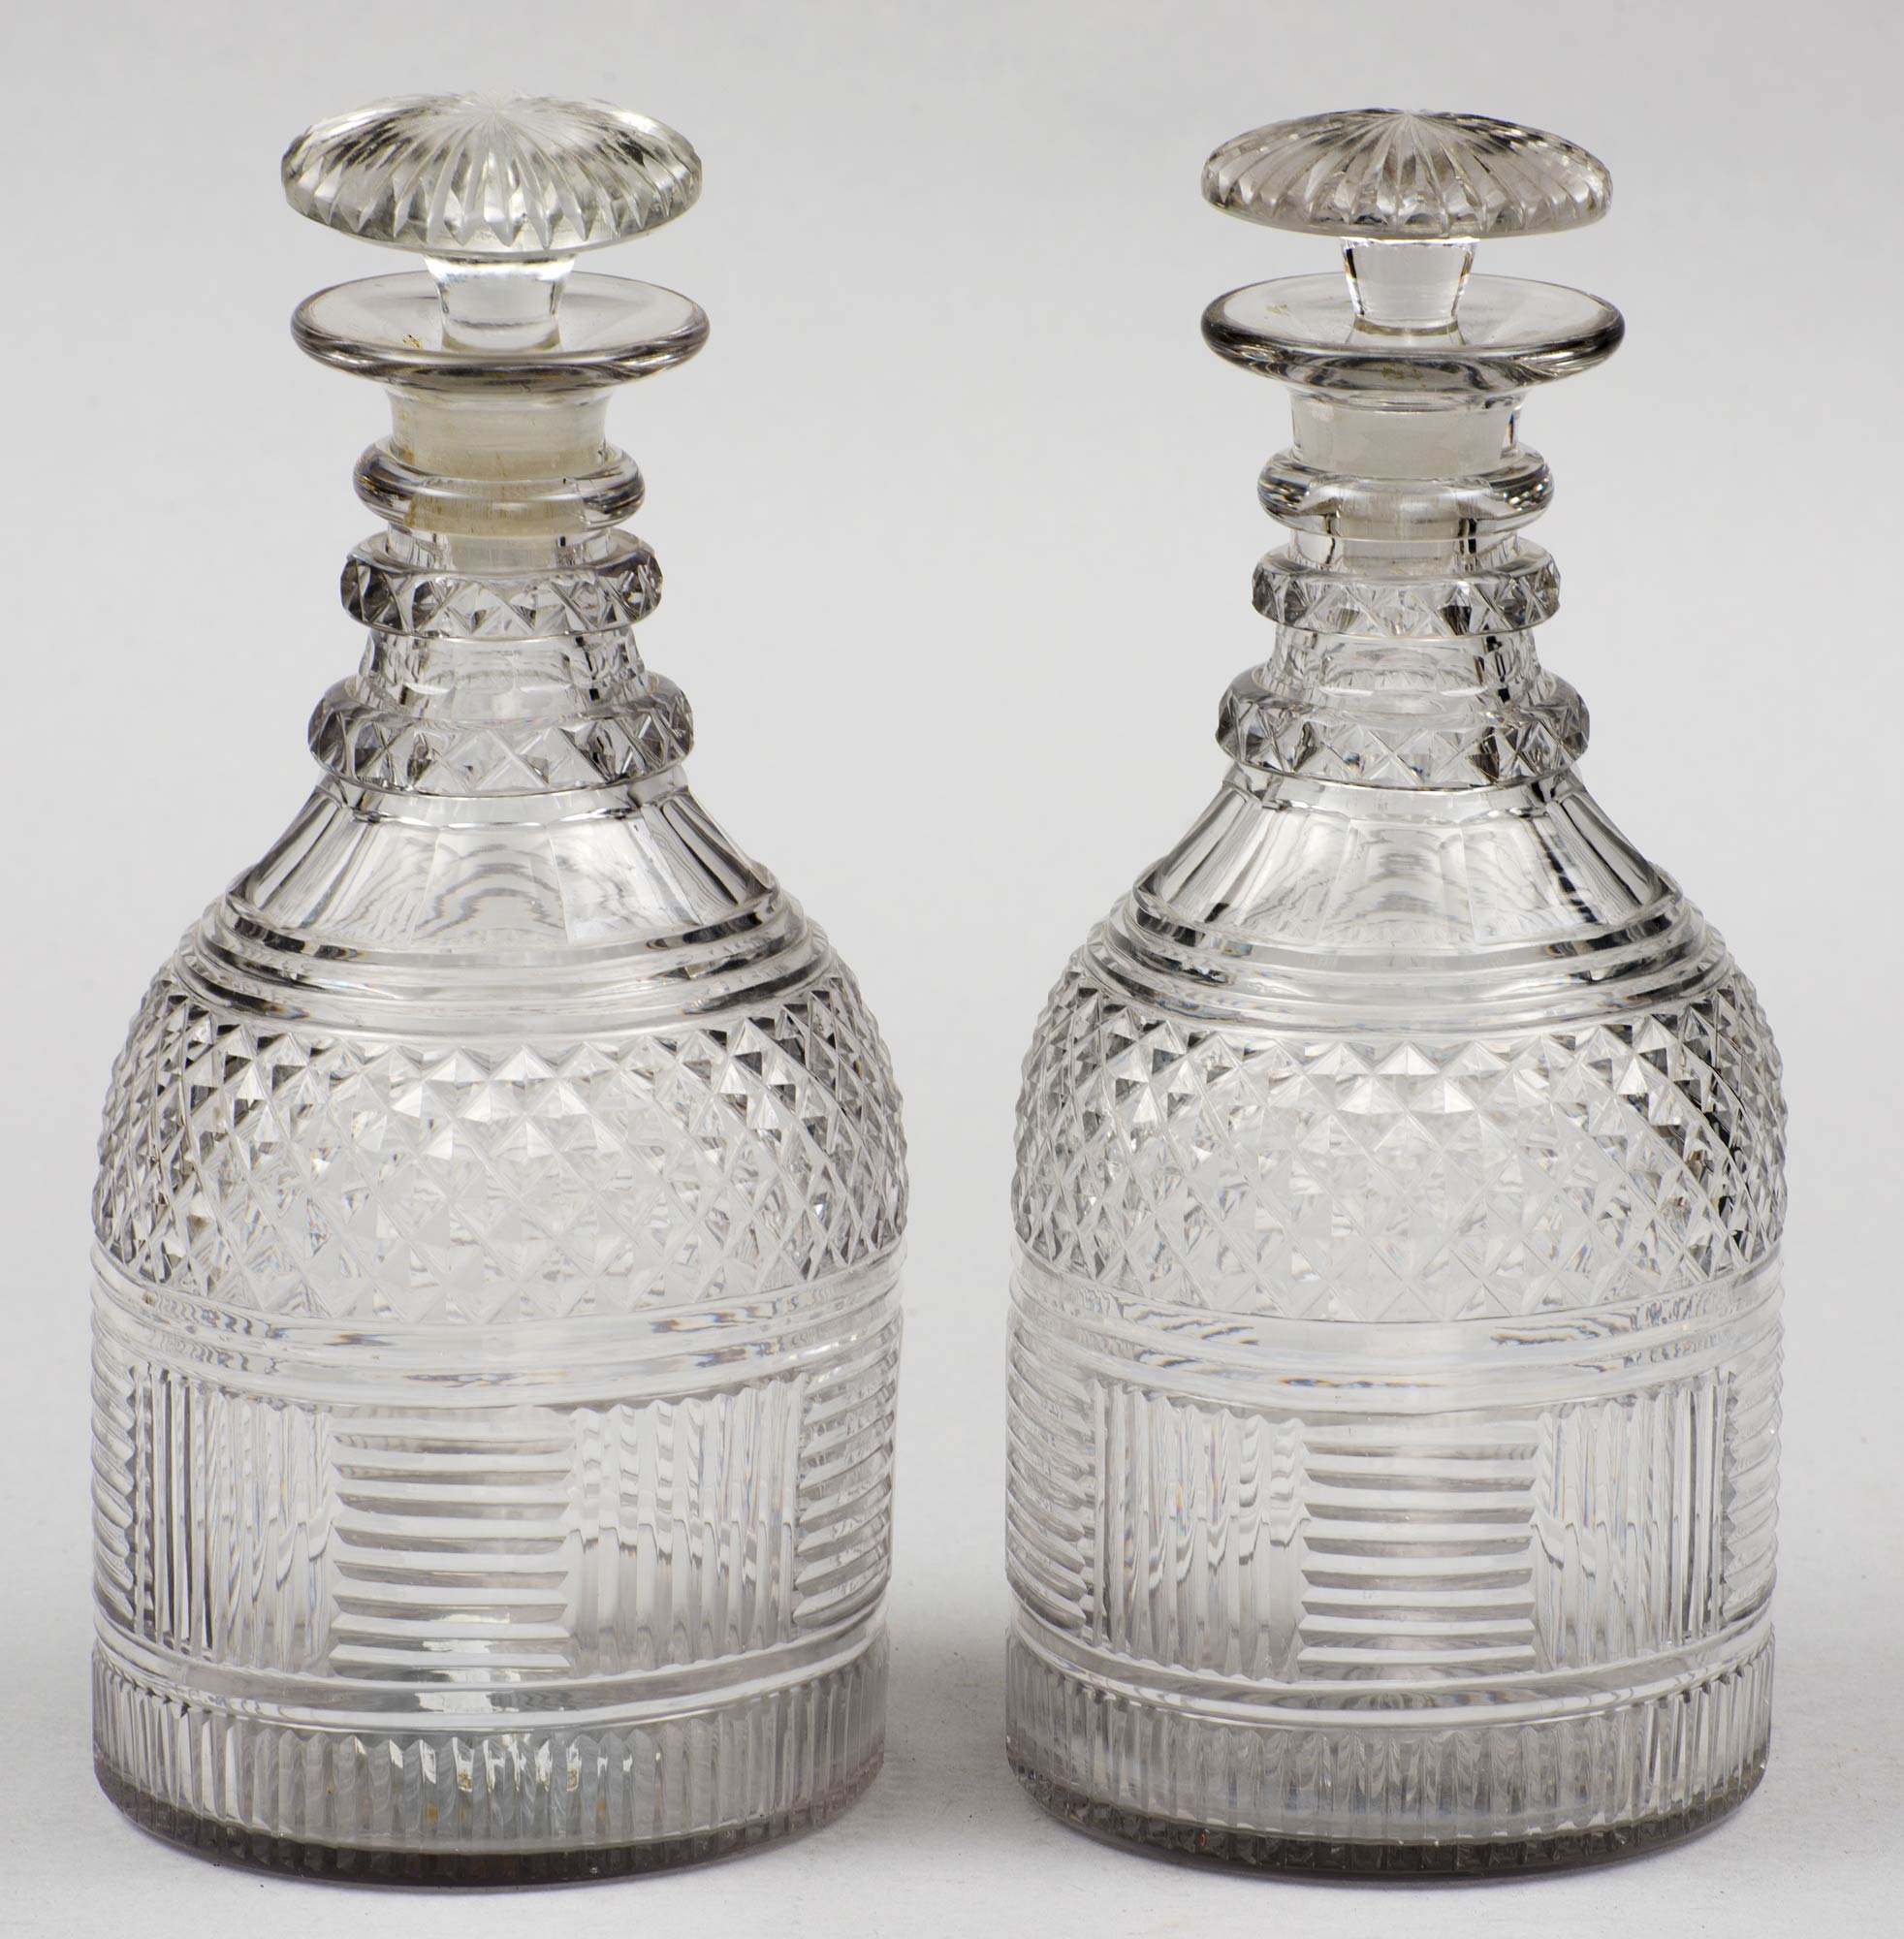 Antique English Cut Glass Decanters